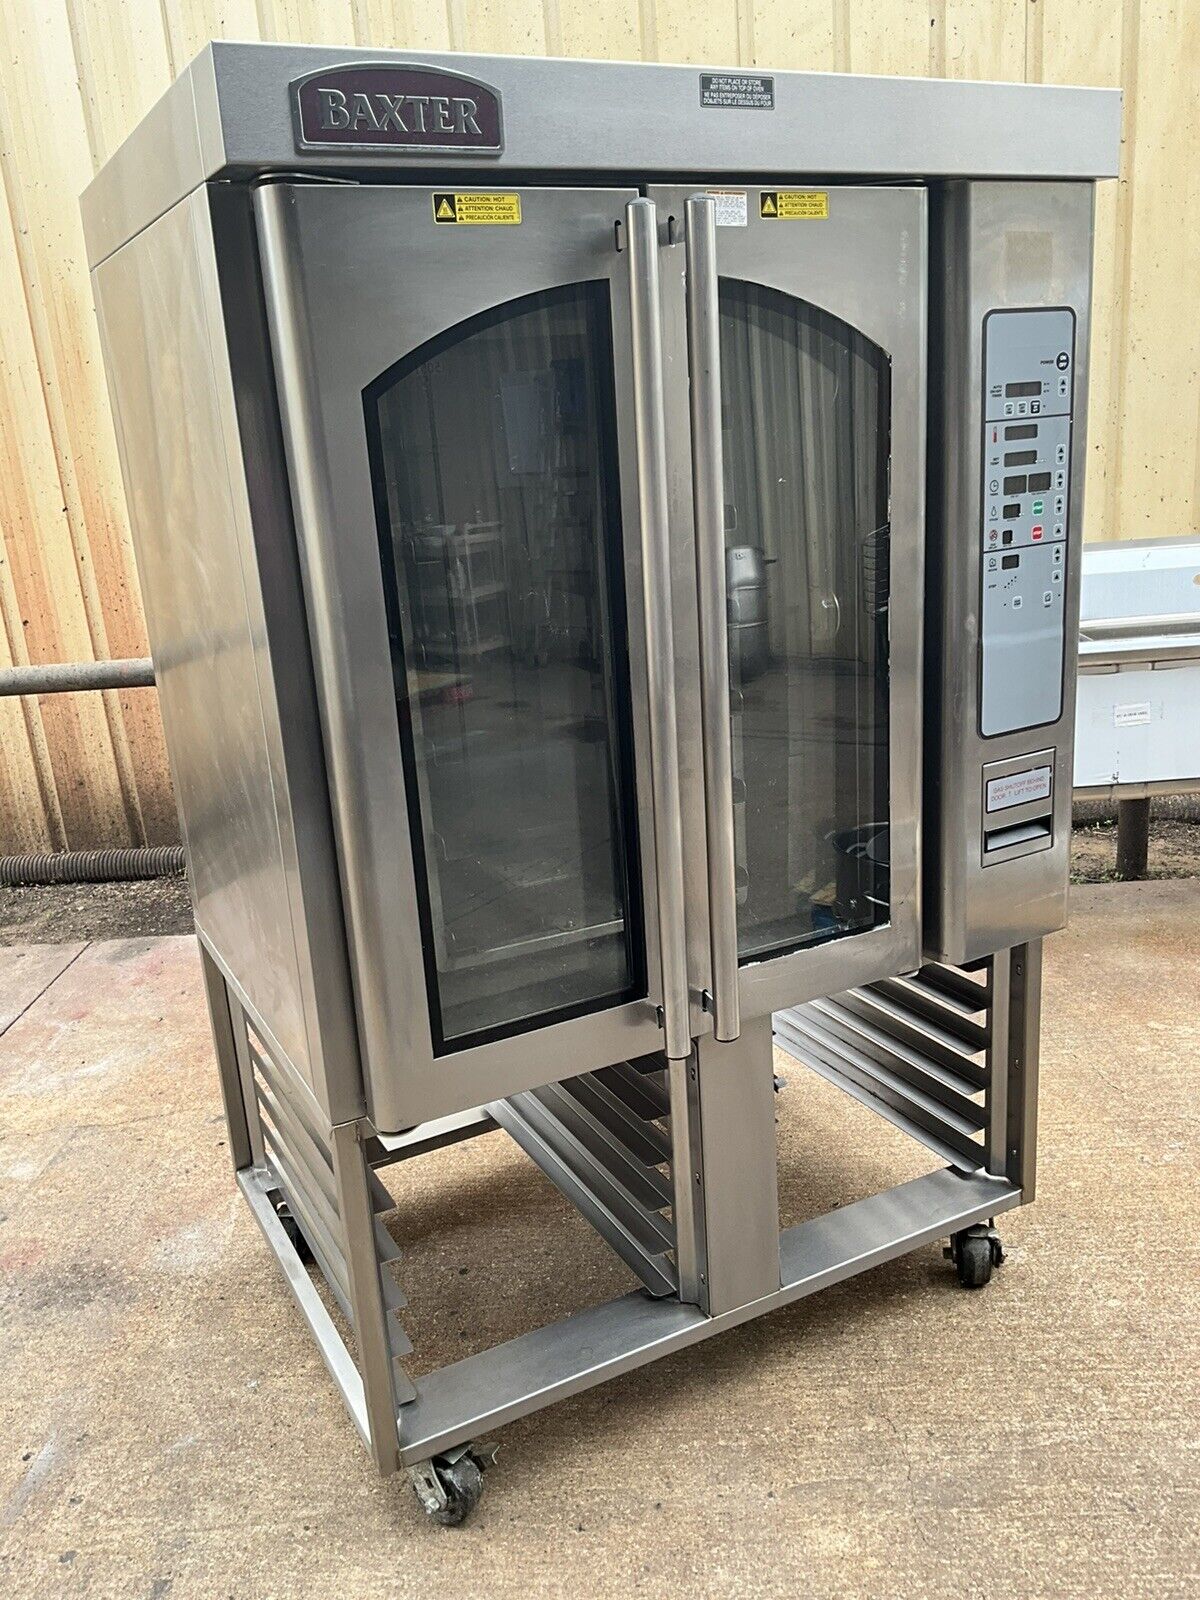 Baxter Hobart OV310G Gas mini rack oven steam injected stand bakery bread Pastry